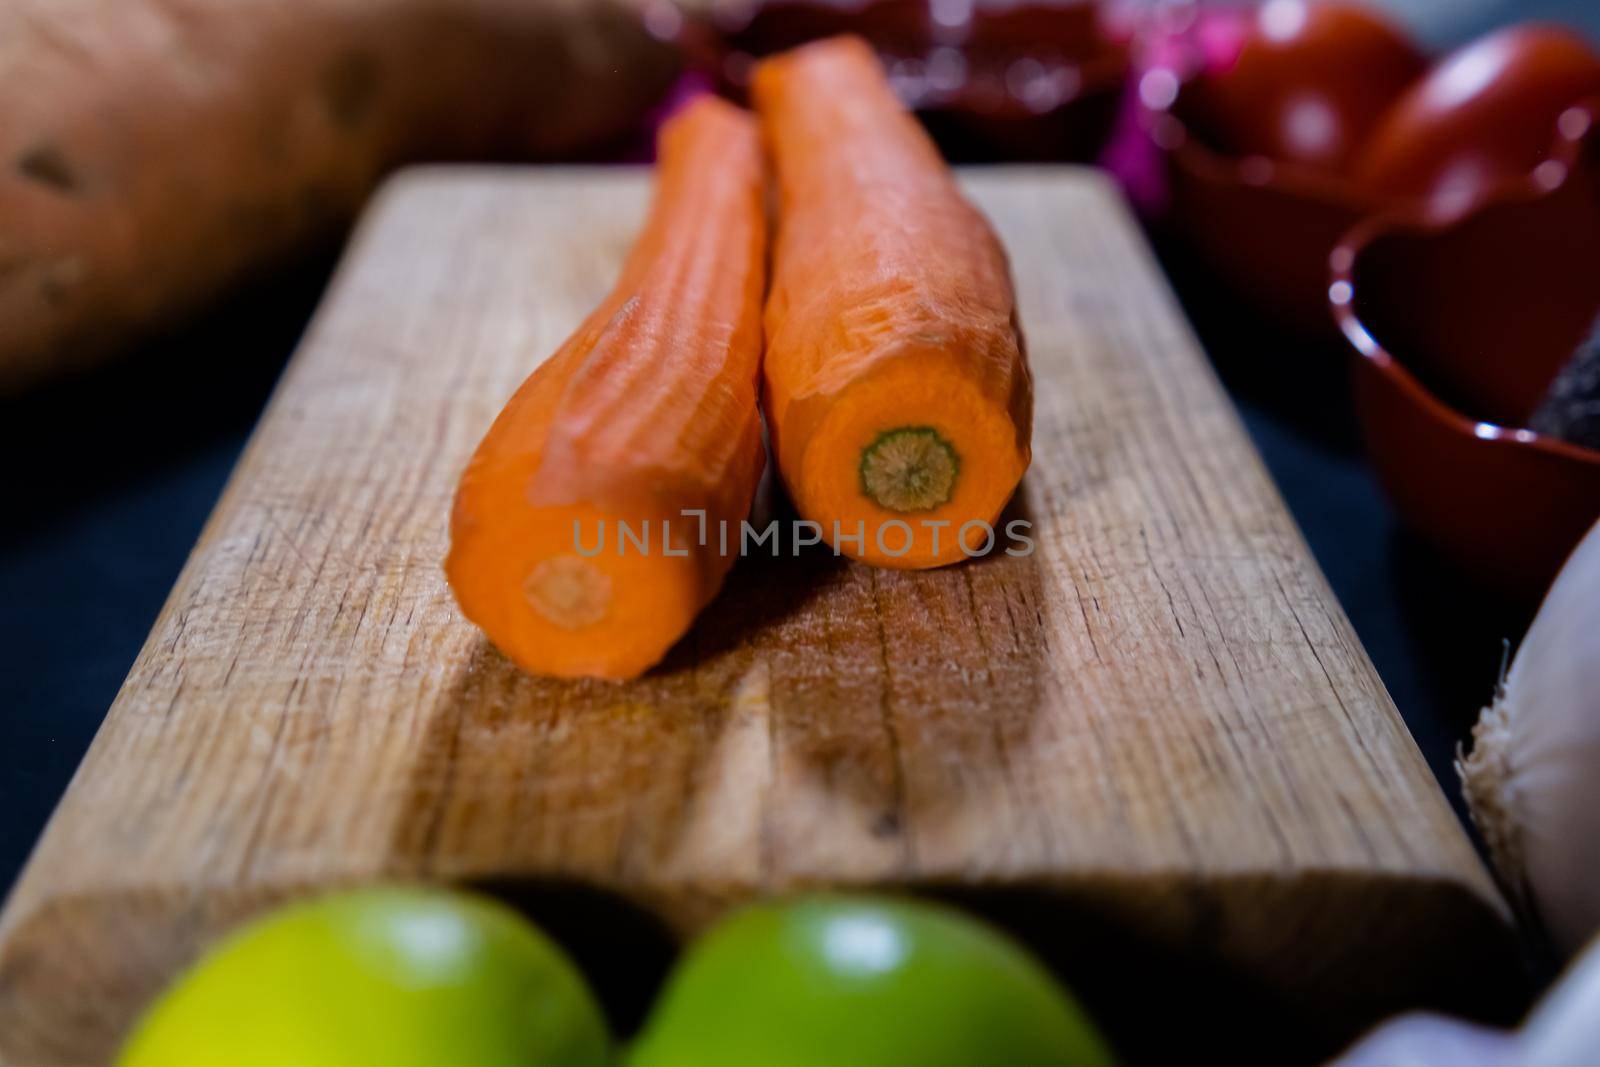 Close-up of two peeled carrots on wooden cutting board surrounded by vegetables in clay pots. Fresh and thin carrots, limes, onion, avocado, and more above black surface. Healthy food preparation